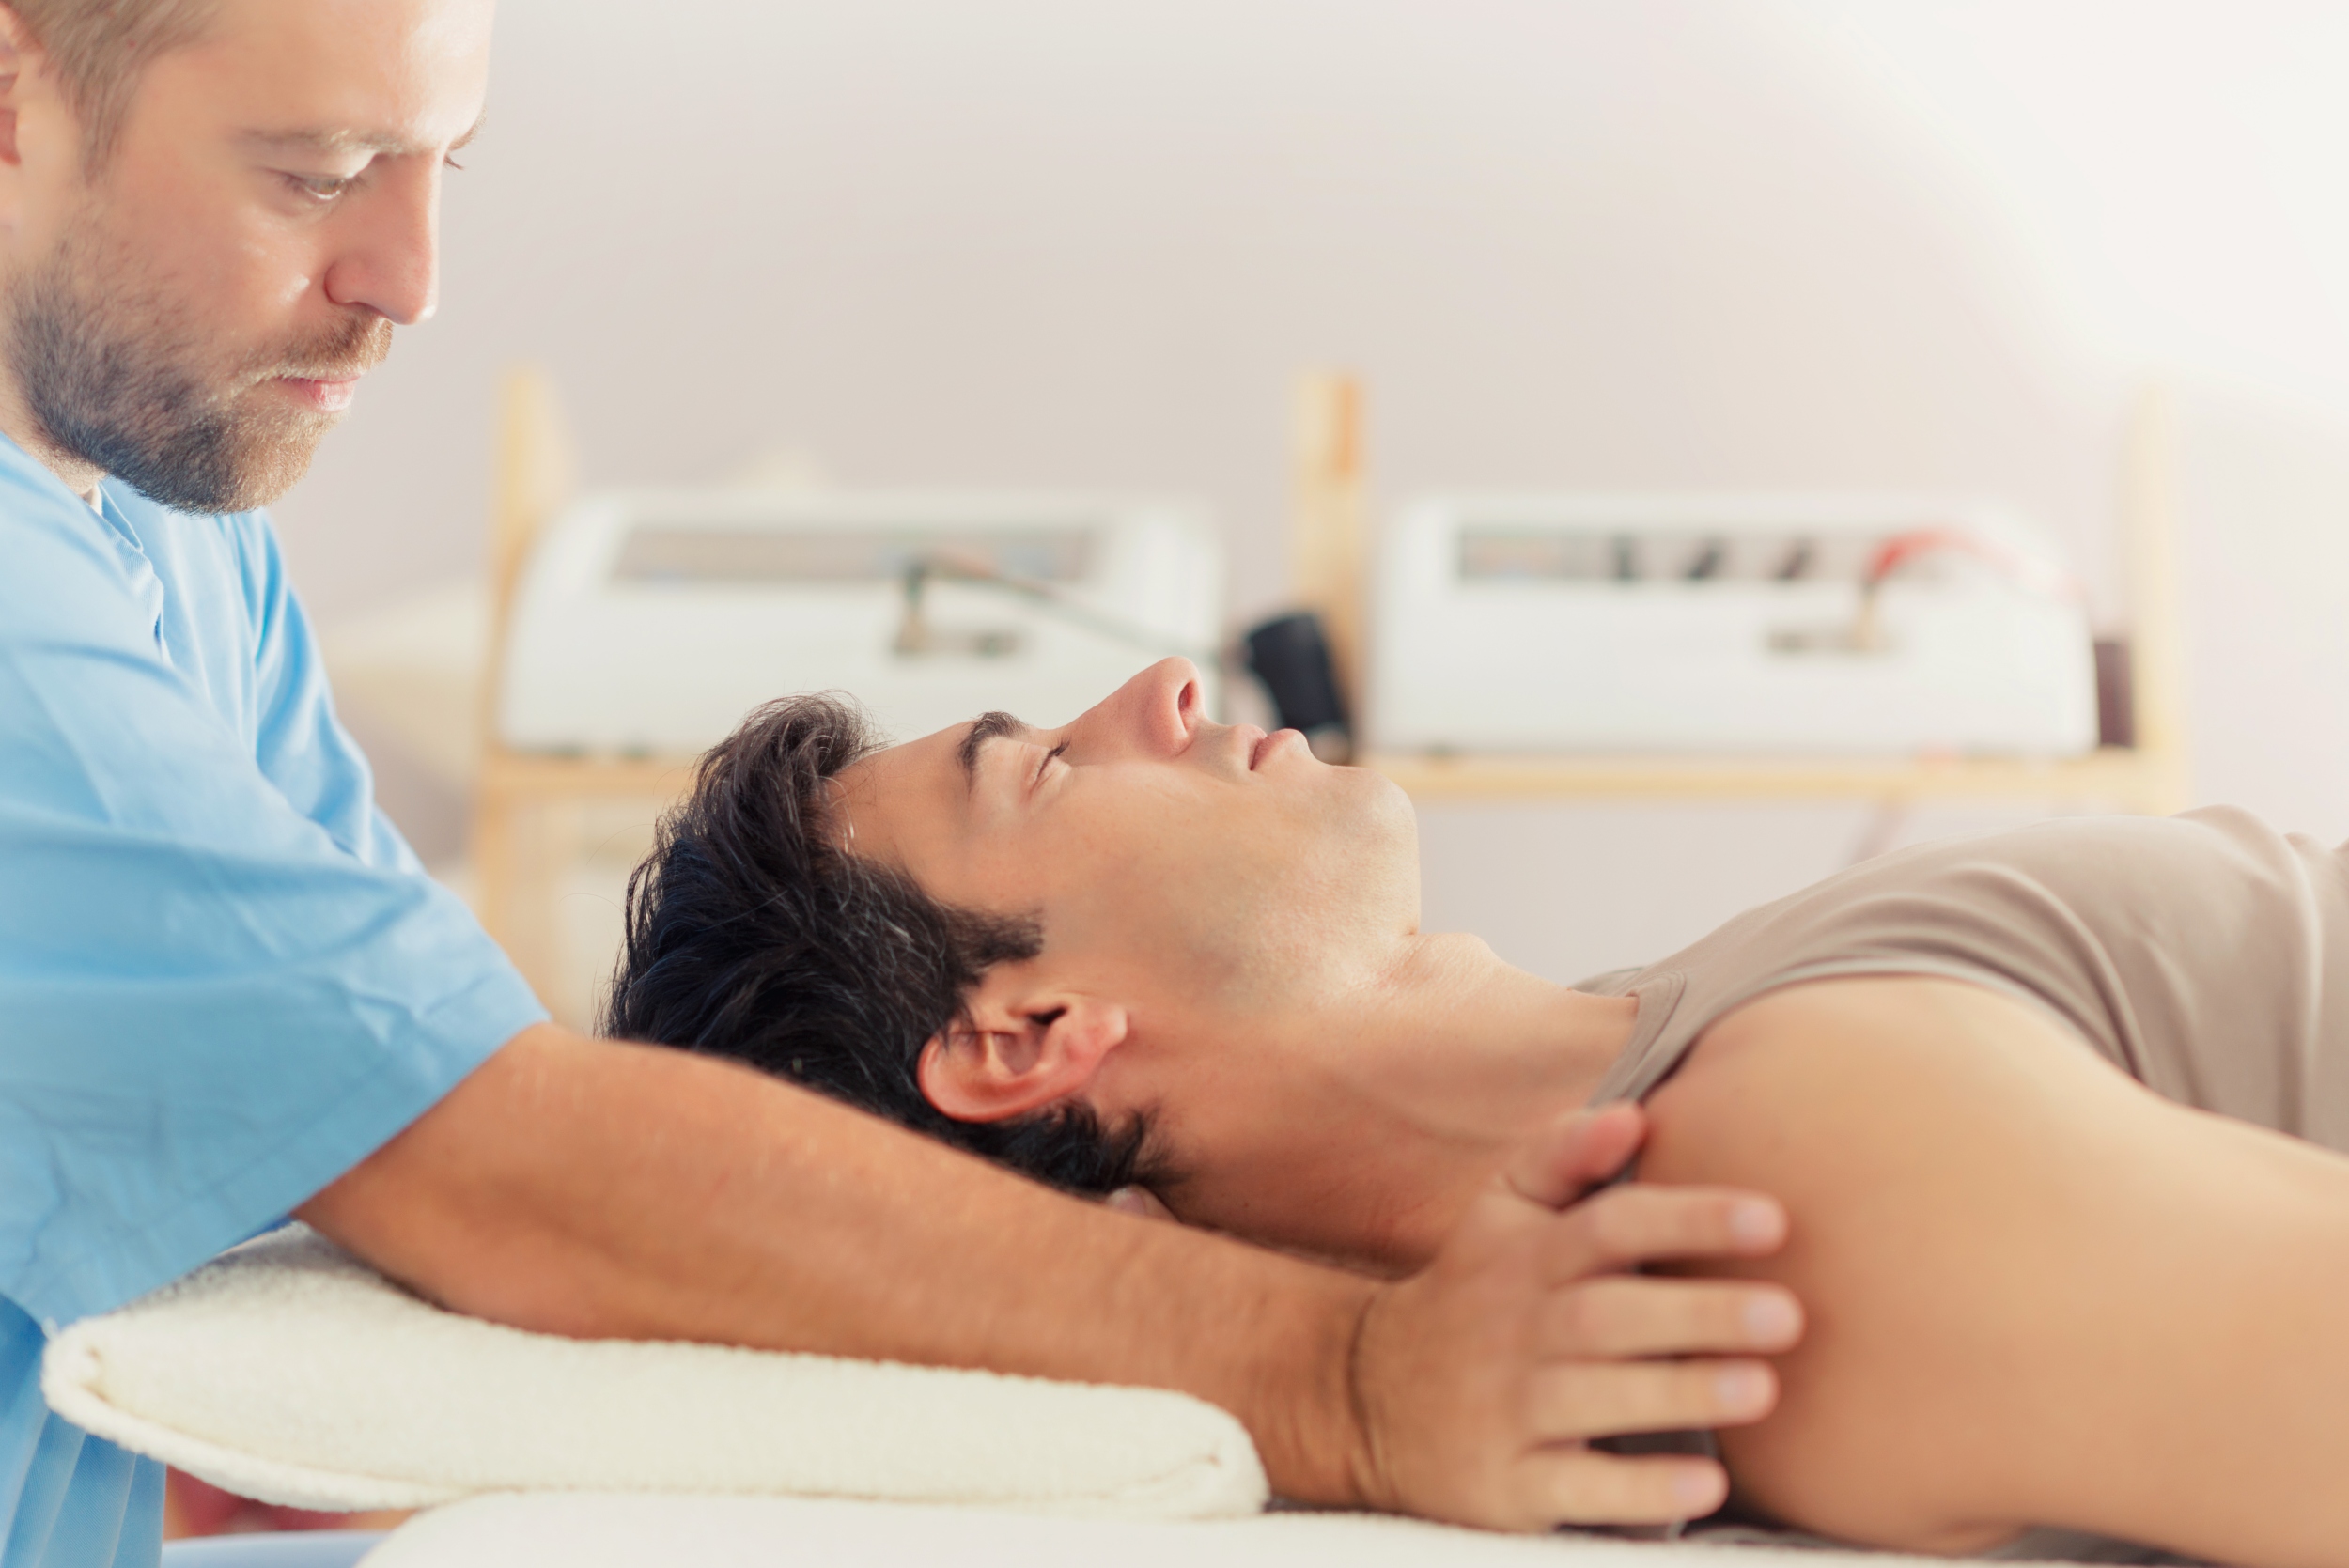 5 interesting facts about chiropractic care